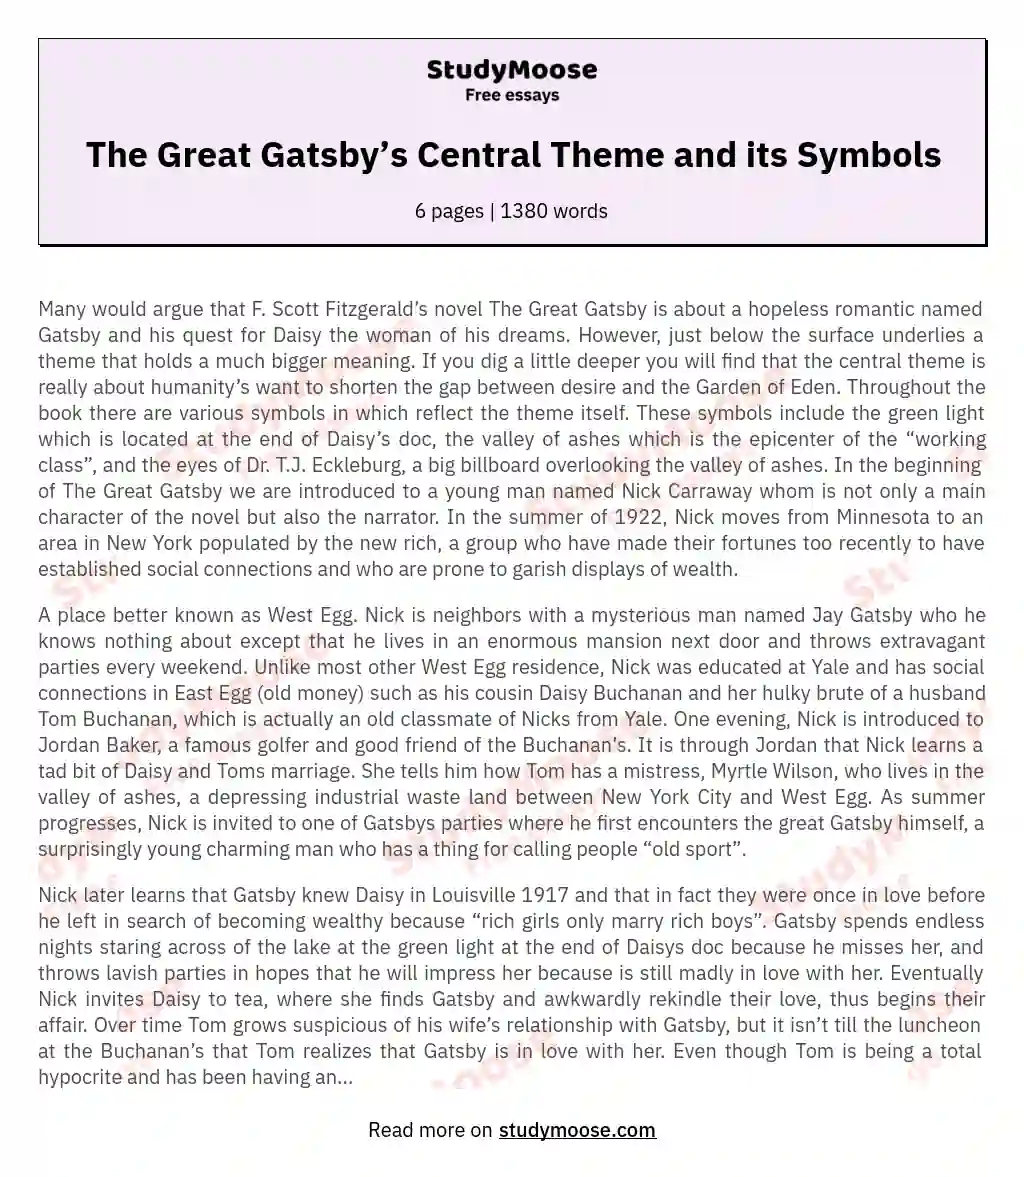 The Great Gatsby’s Central Theme and its Symbols